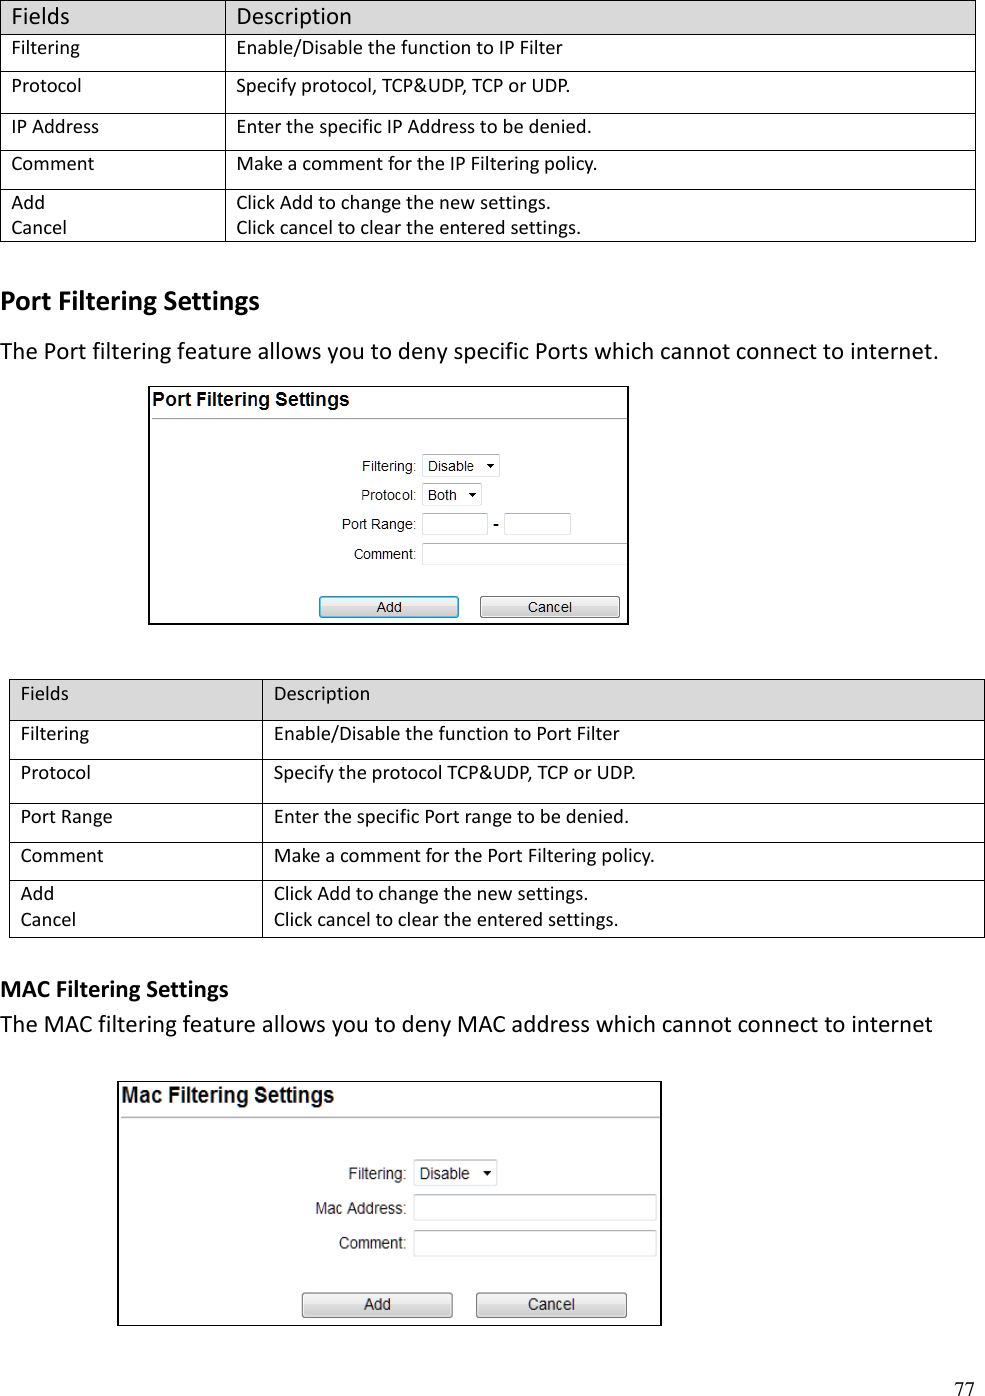 77  Fields Description Filtering Enable/Disable the function to IP Filter Protocol Specify protocol, TCP&amp;UDP, TCP or UDP. IP Address Enter the specific IP Address to be denied. Comment Make a comment for the IP Filtering policy. Add Cancel Click Add to change the new settings. Click cancel to clear the entered settings.  Port Filtering Settings The Port filtering feature allows you to deny specific Ports which cannot connect to internet.       Fields Description Filtering Enable/Disable the function to Port Filter Protocol Specify the protocol TCP&amp;UDP, TCP or UDP. Port Range Enter the specific Port range to be denied. Comment Make a comment for the Port Filtering policy. Add Cancel Click Add to change the new settings. Click cancel to clear the entered settings.  MAC Filtering Settings The MAC filtering feature allows you to deny MAC address which cannot connect to internet      